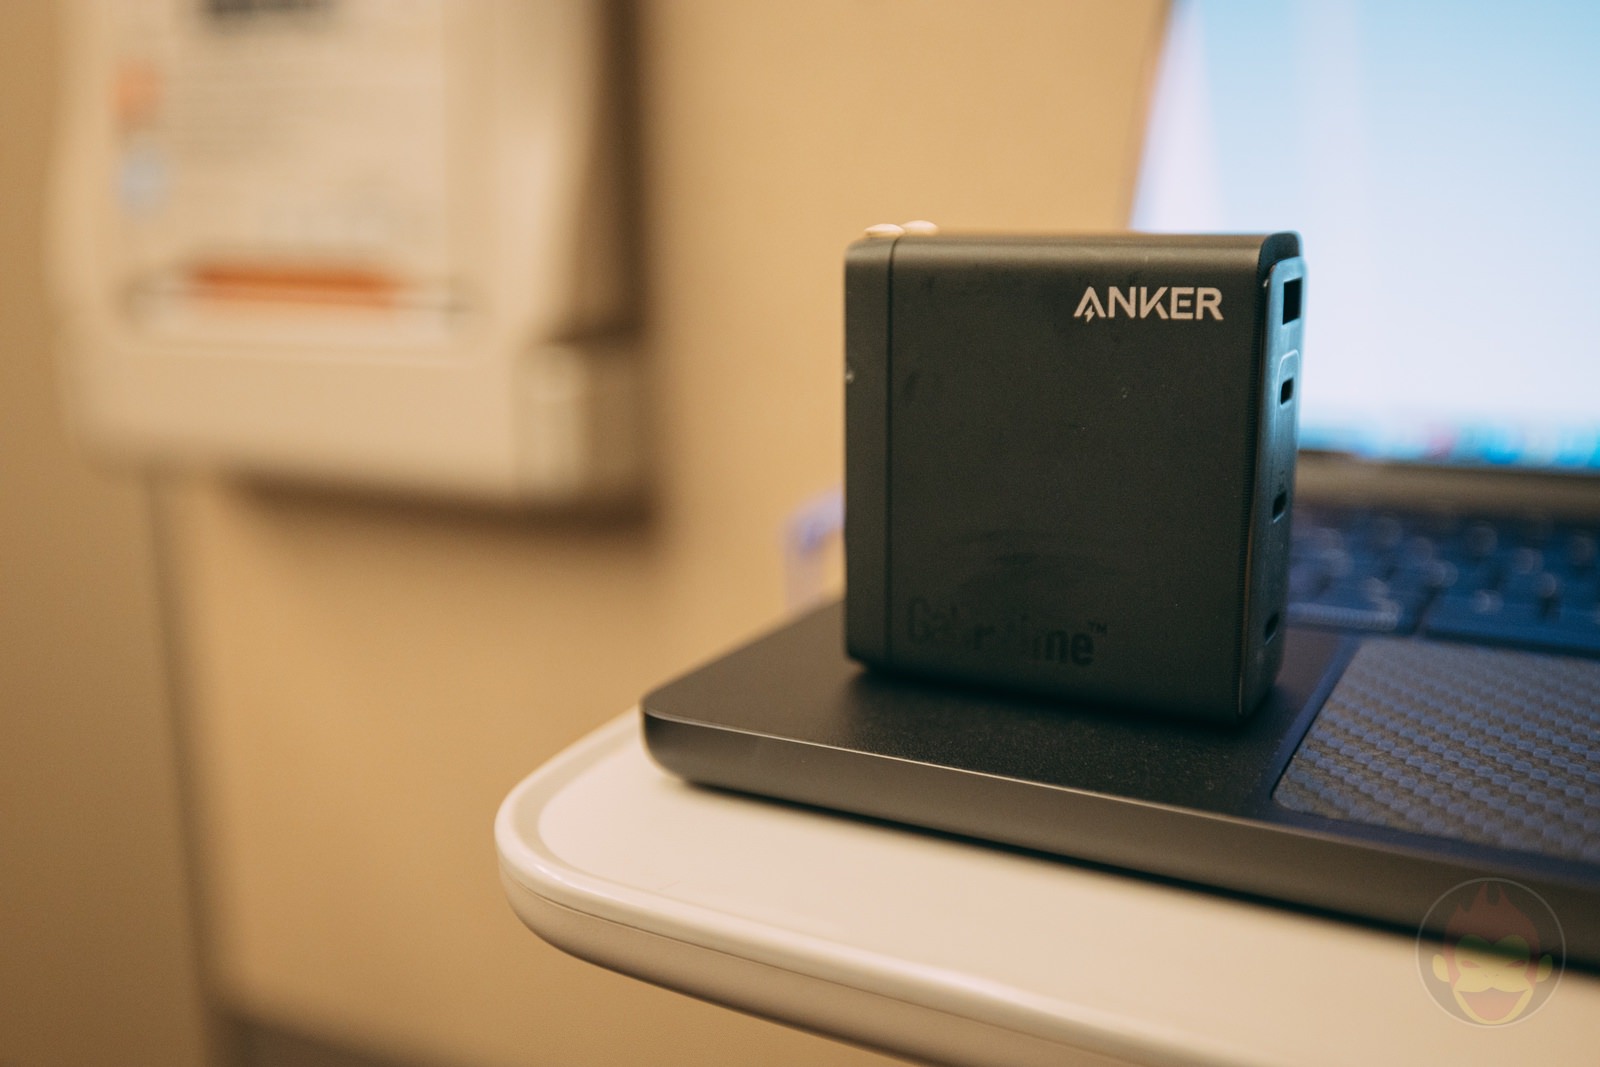 Anker-Products-I-used-on-the-trip-to-nagoya-01.jpg